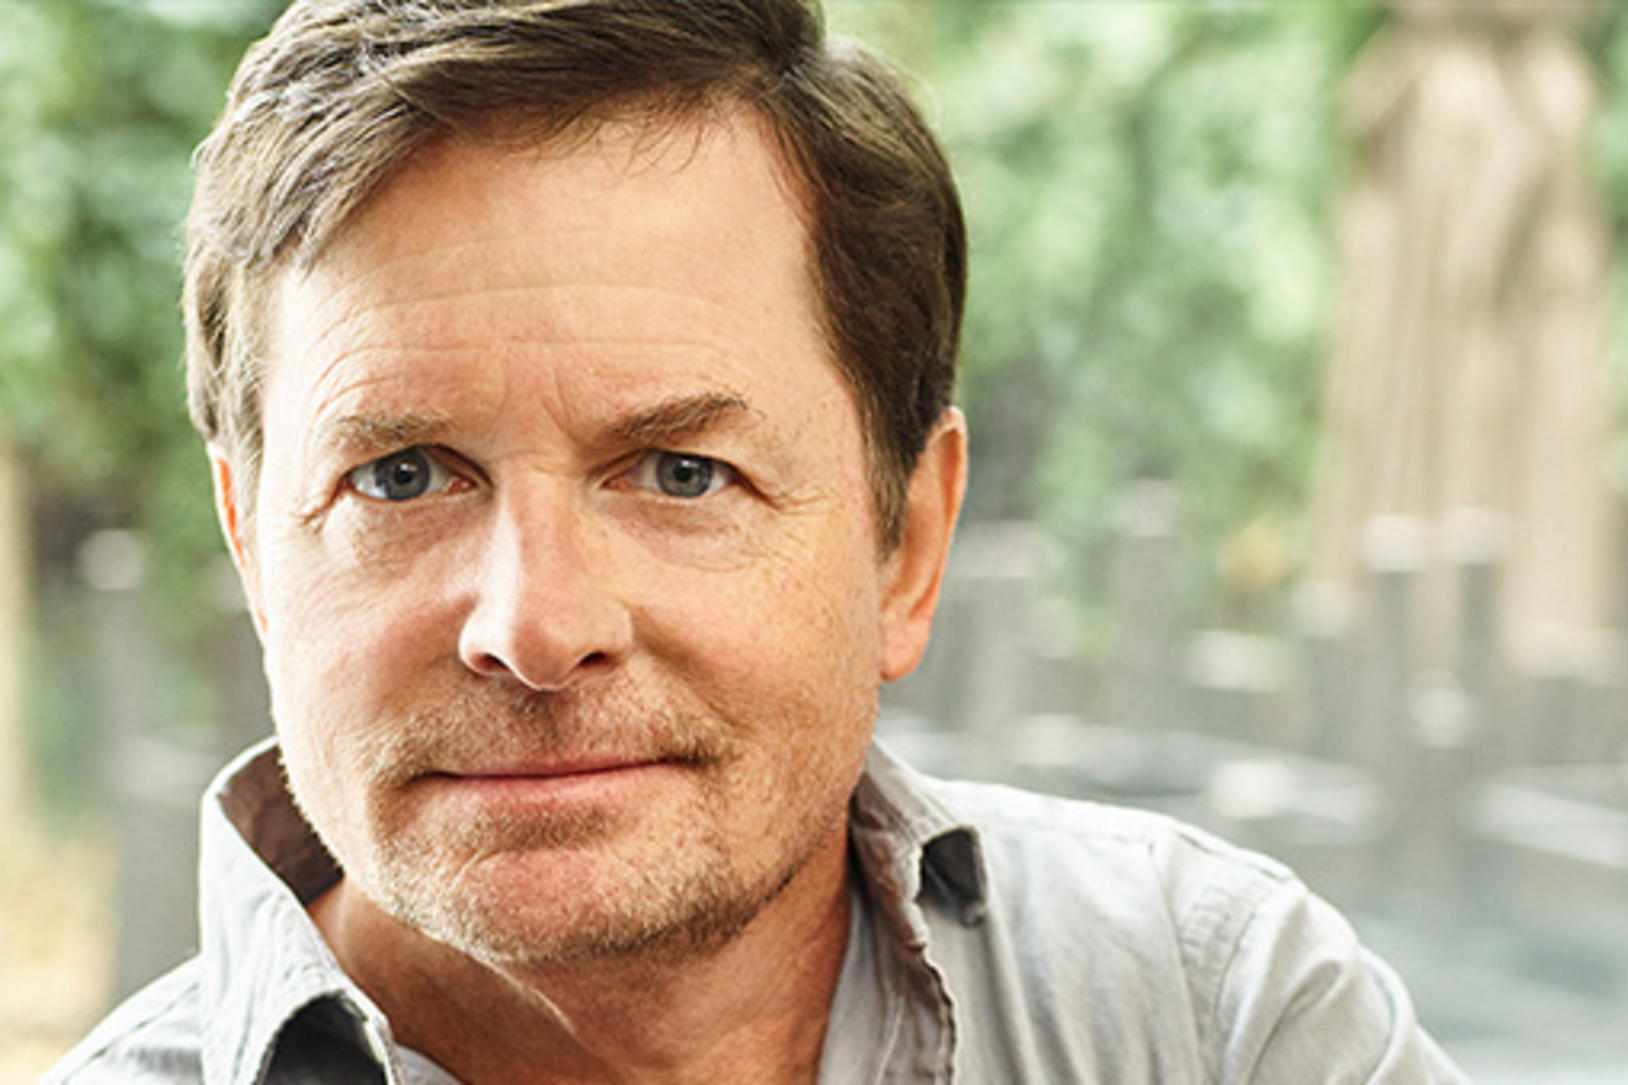 Michael J. Fox on Living with Parkinson's "To me, hope is informed